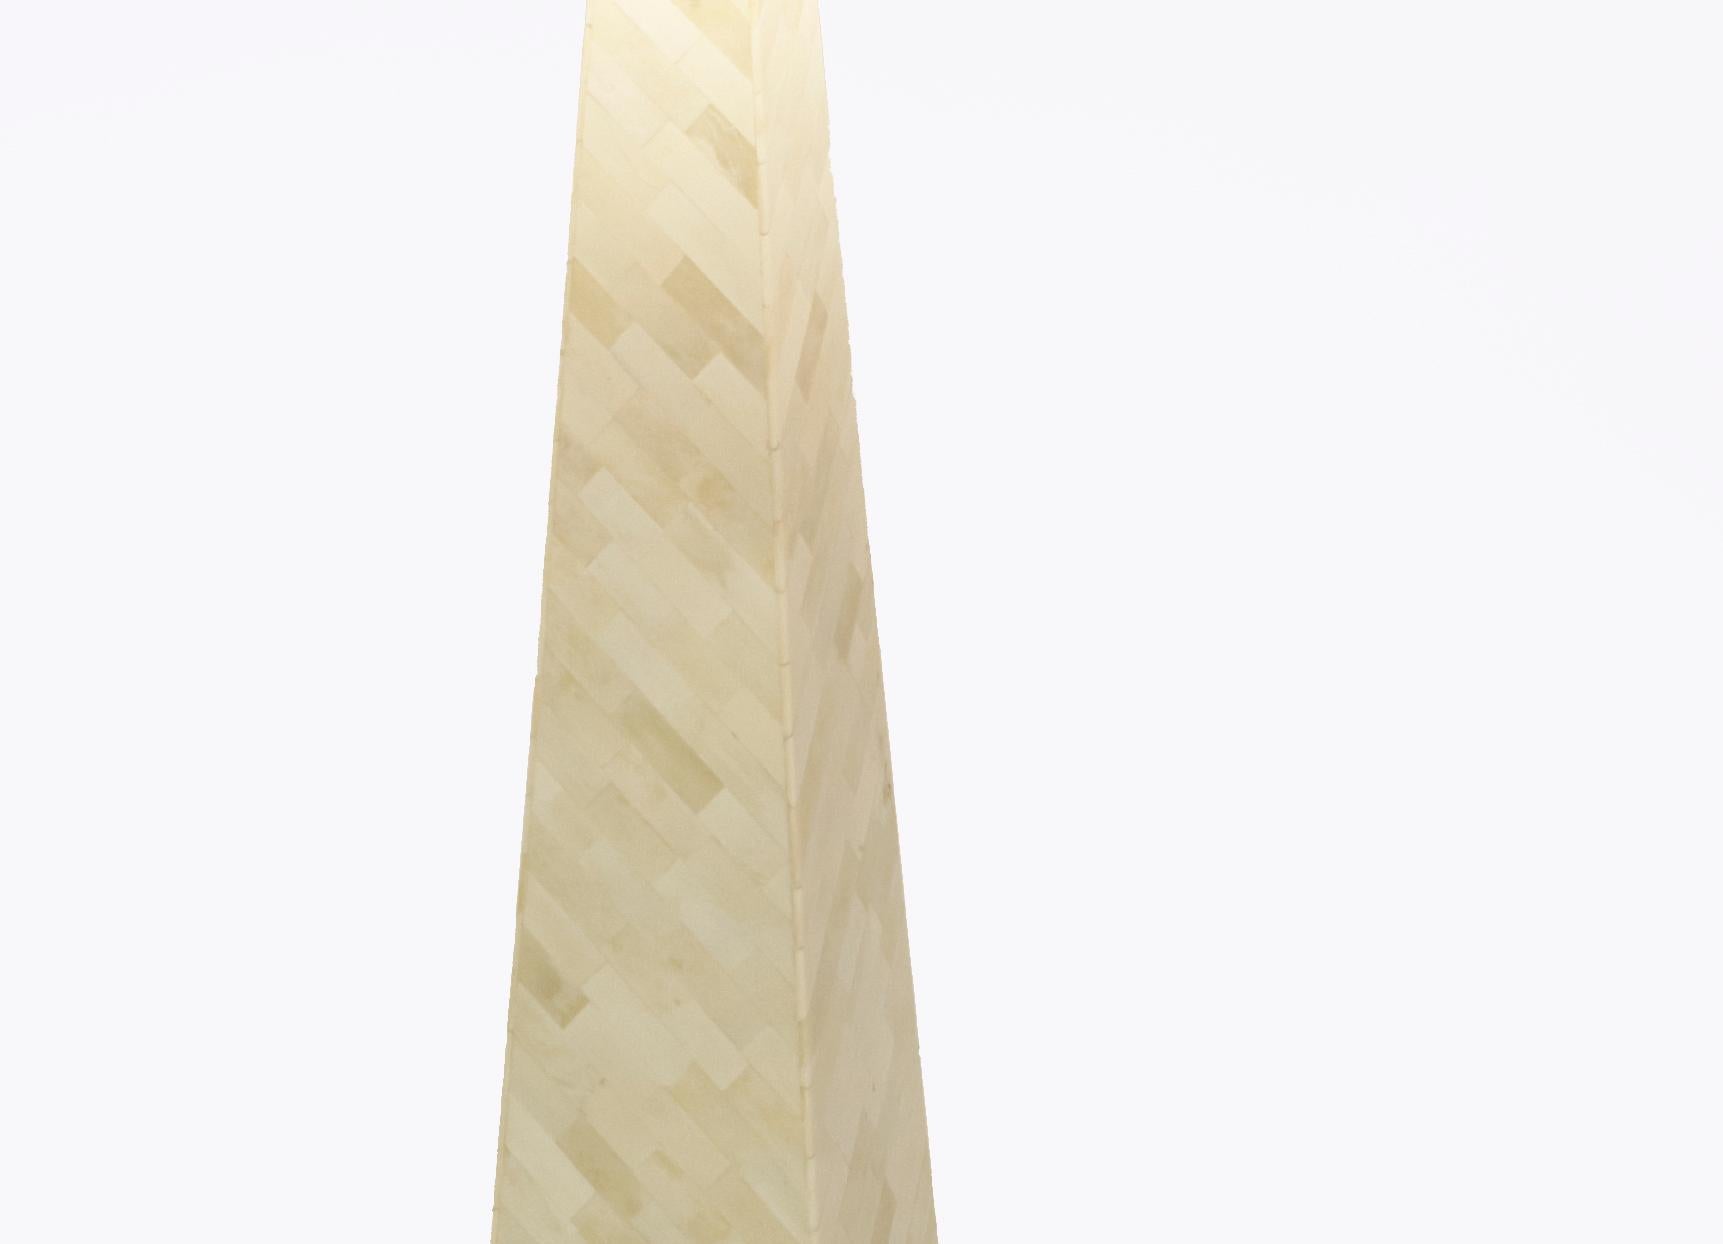 Named after the Japanese pyramid museum, this floor lamp boasts a strong shape accented by a diagonal arrangement of camel bone chips tessellated over wood.
Lamp shade not included.
Size: 7